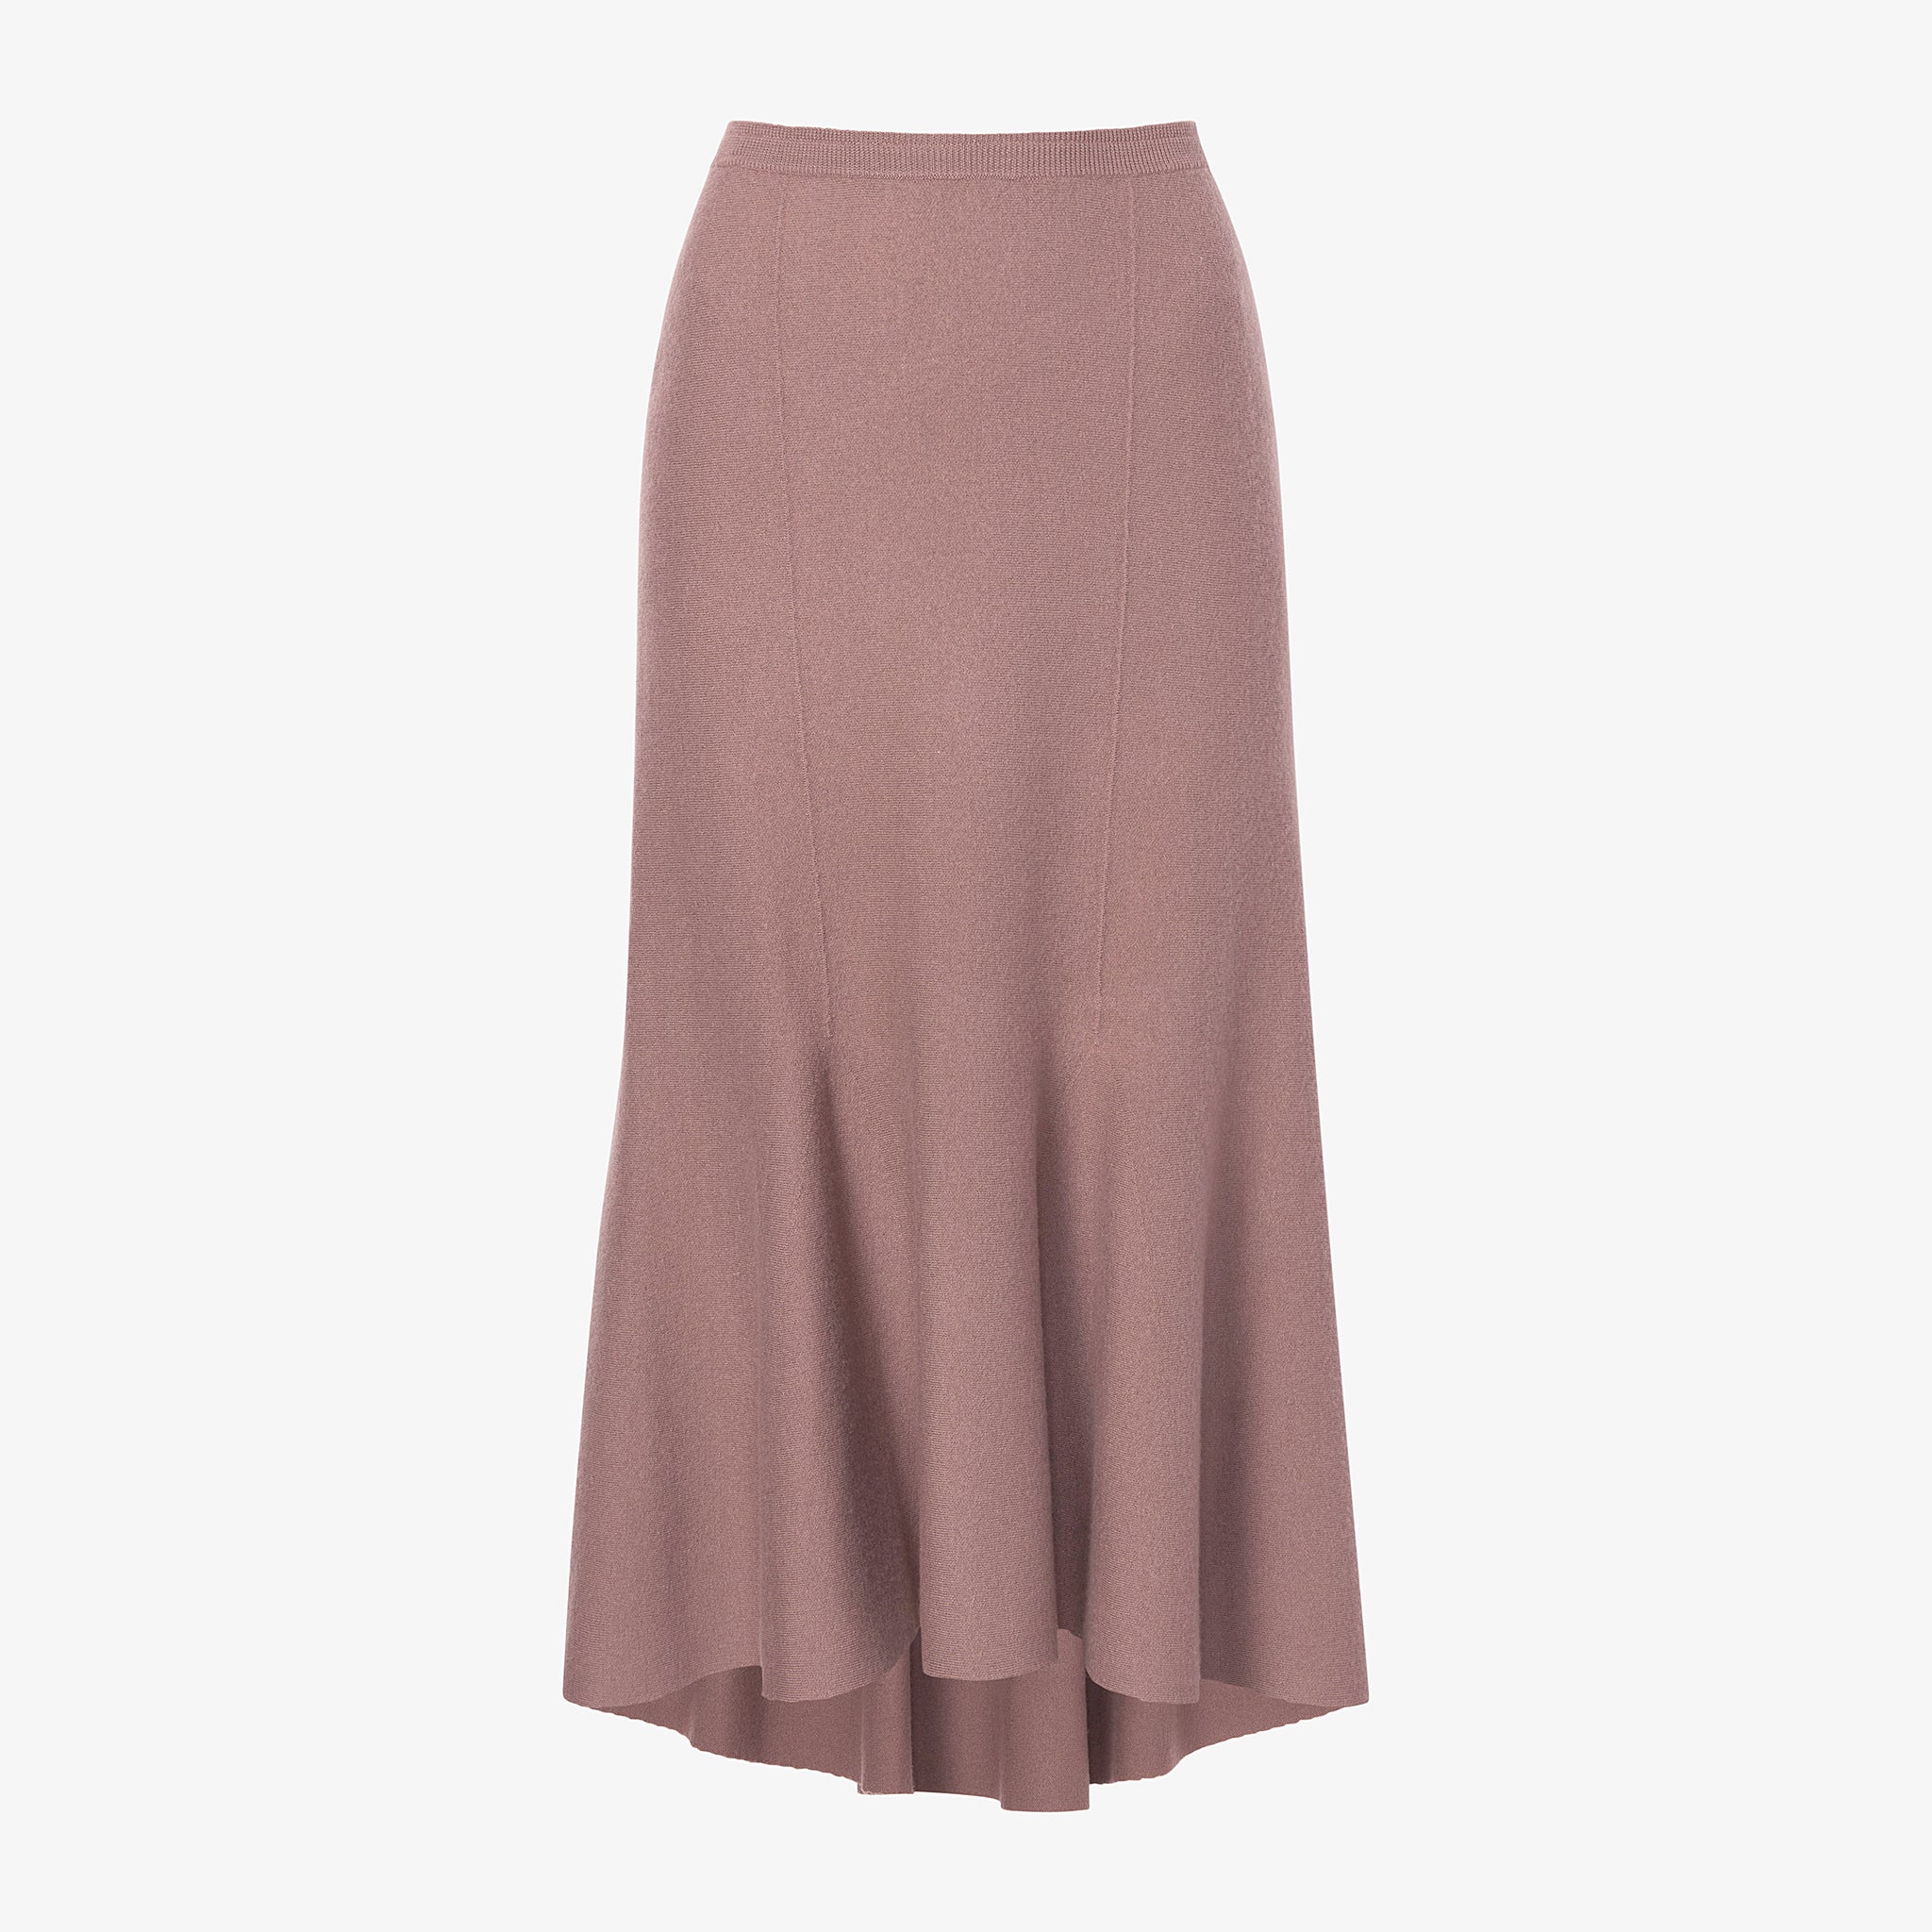 Packshot image of the leah skirt in rose taupe